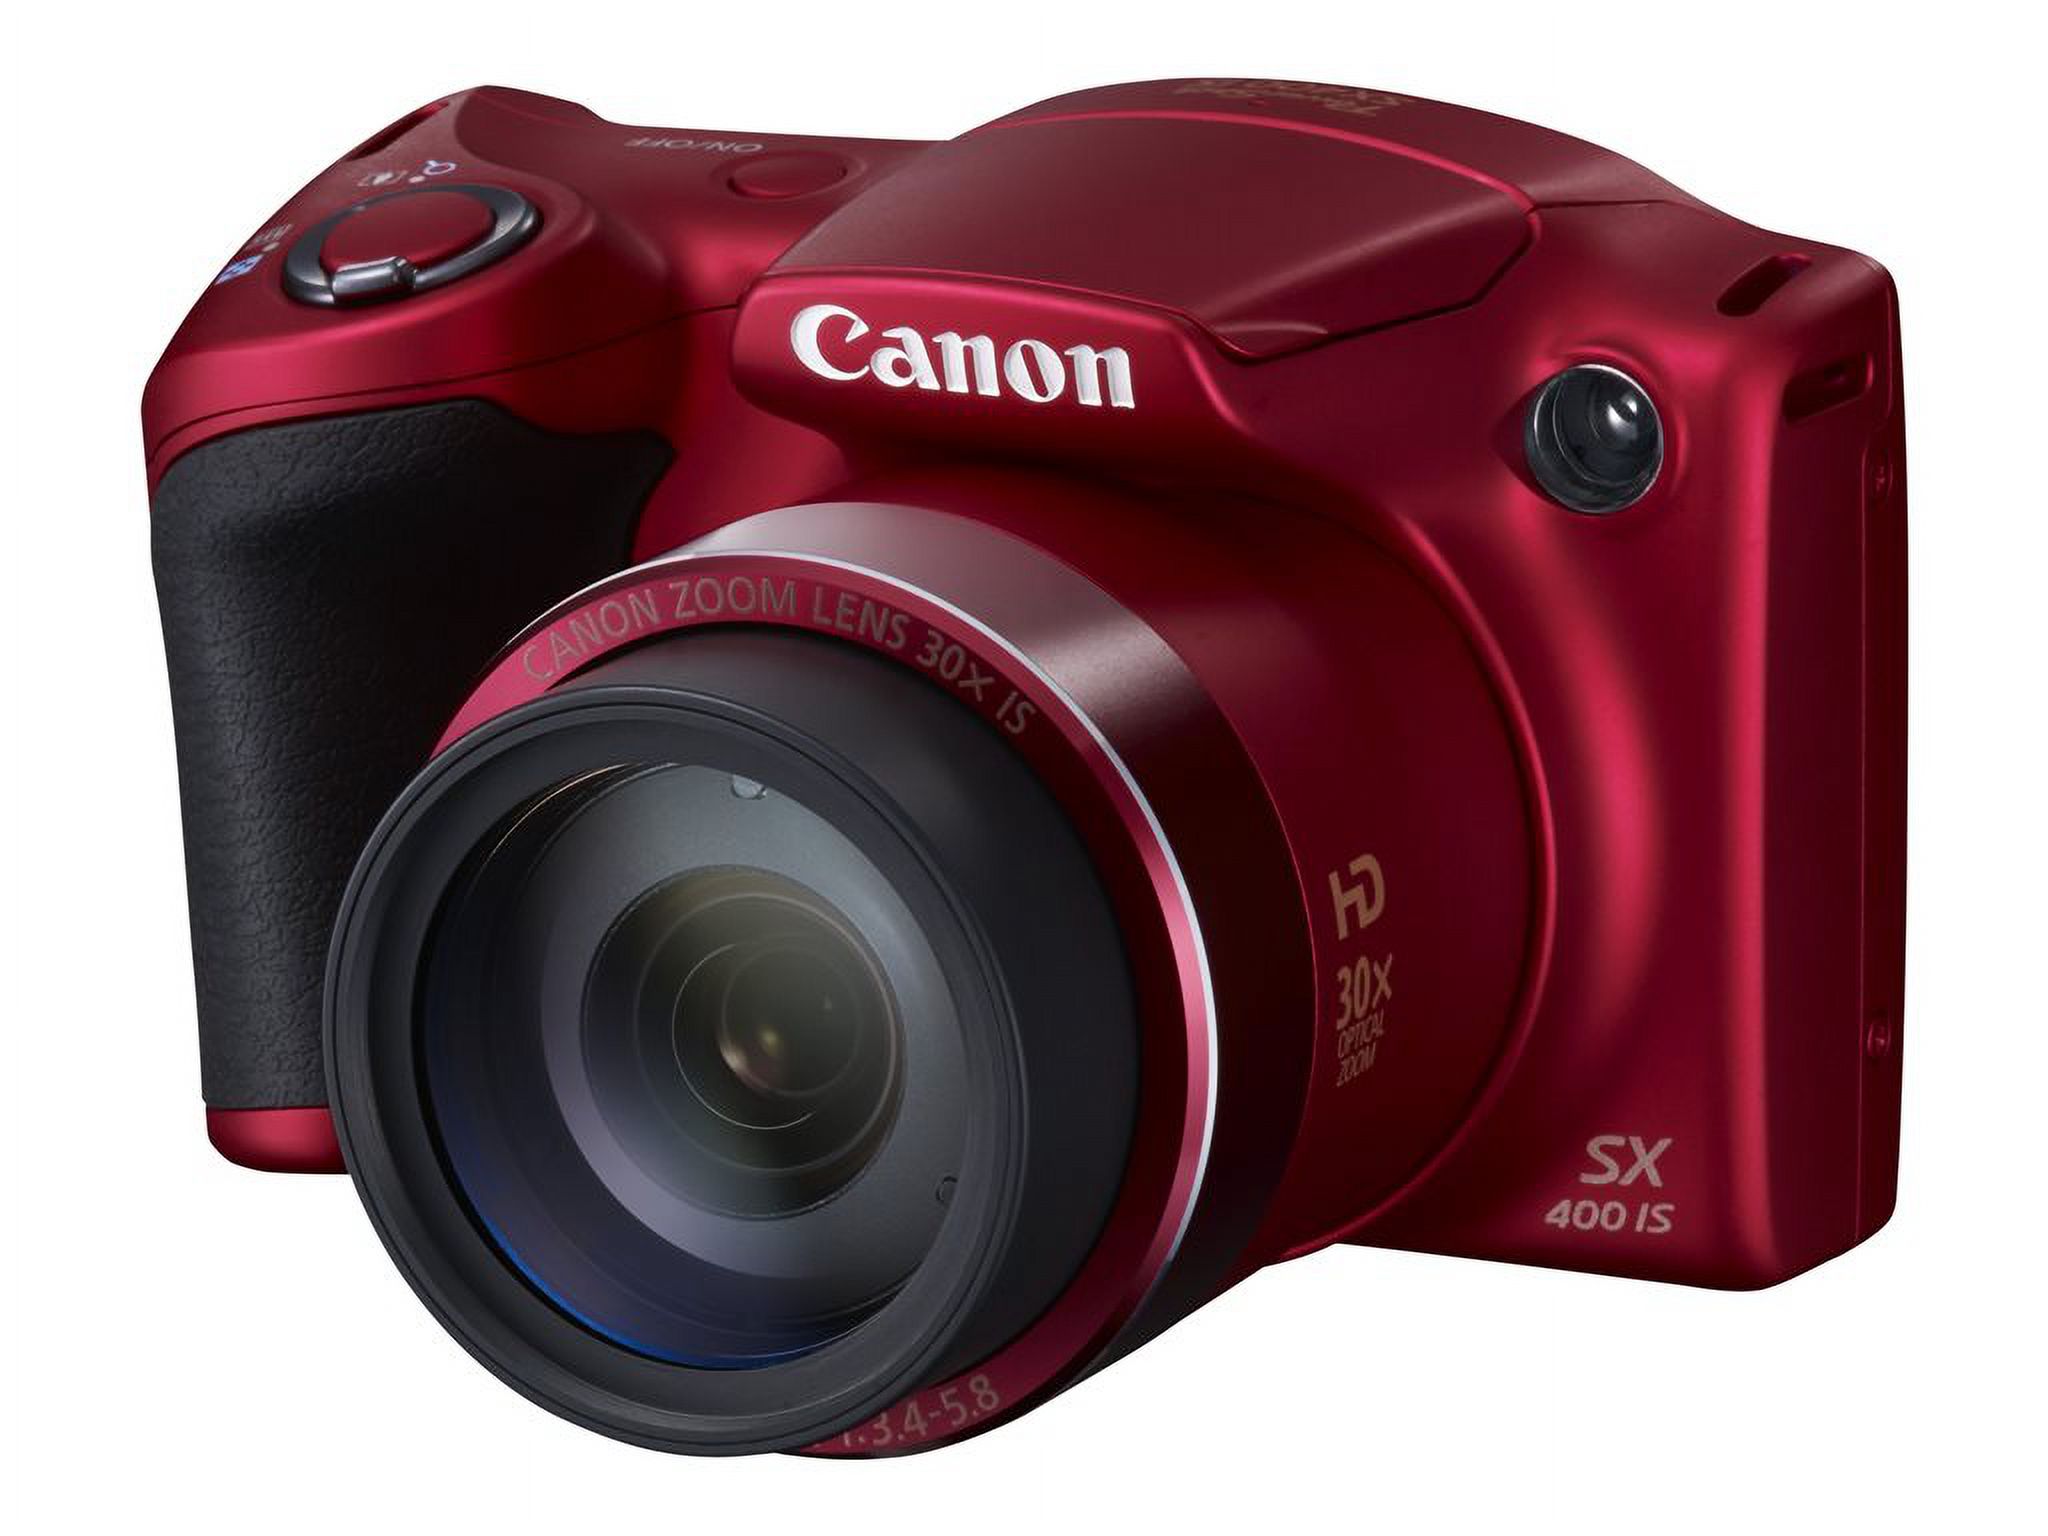 Canon PowerShot SX400 IS - Digital camera - High Definition - compact - 16.0 MP - 30 x optical zoom - red - image 55 of 72